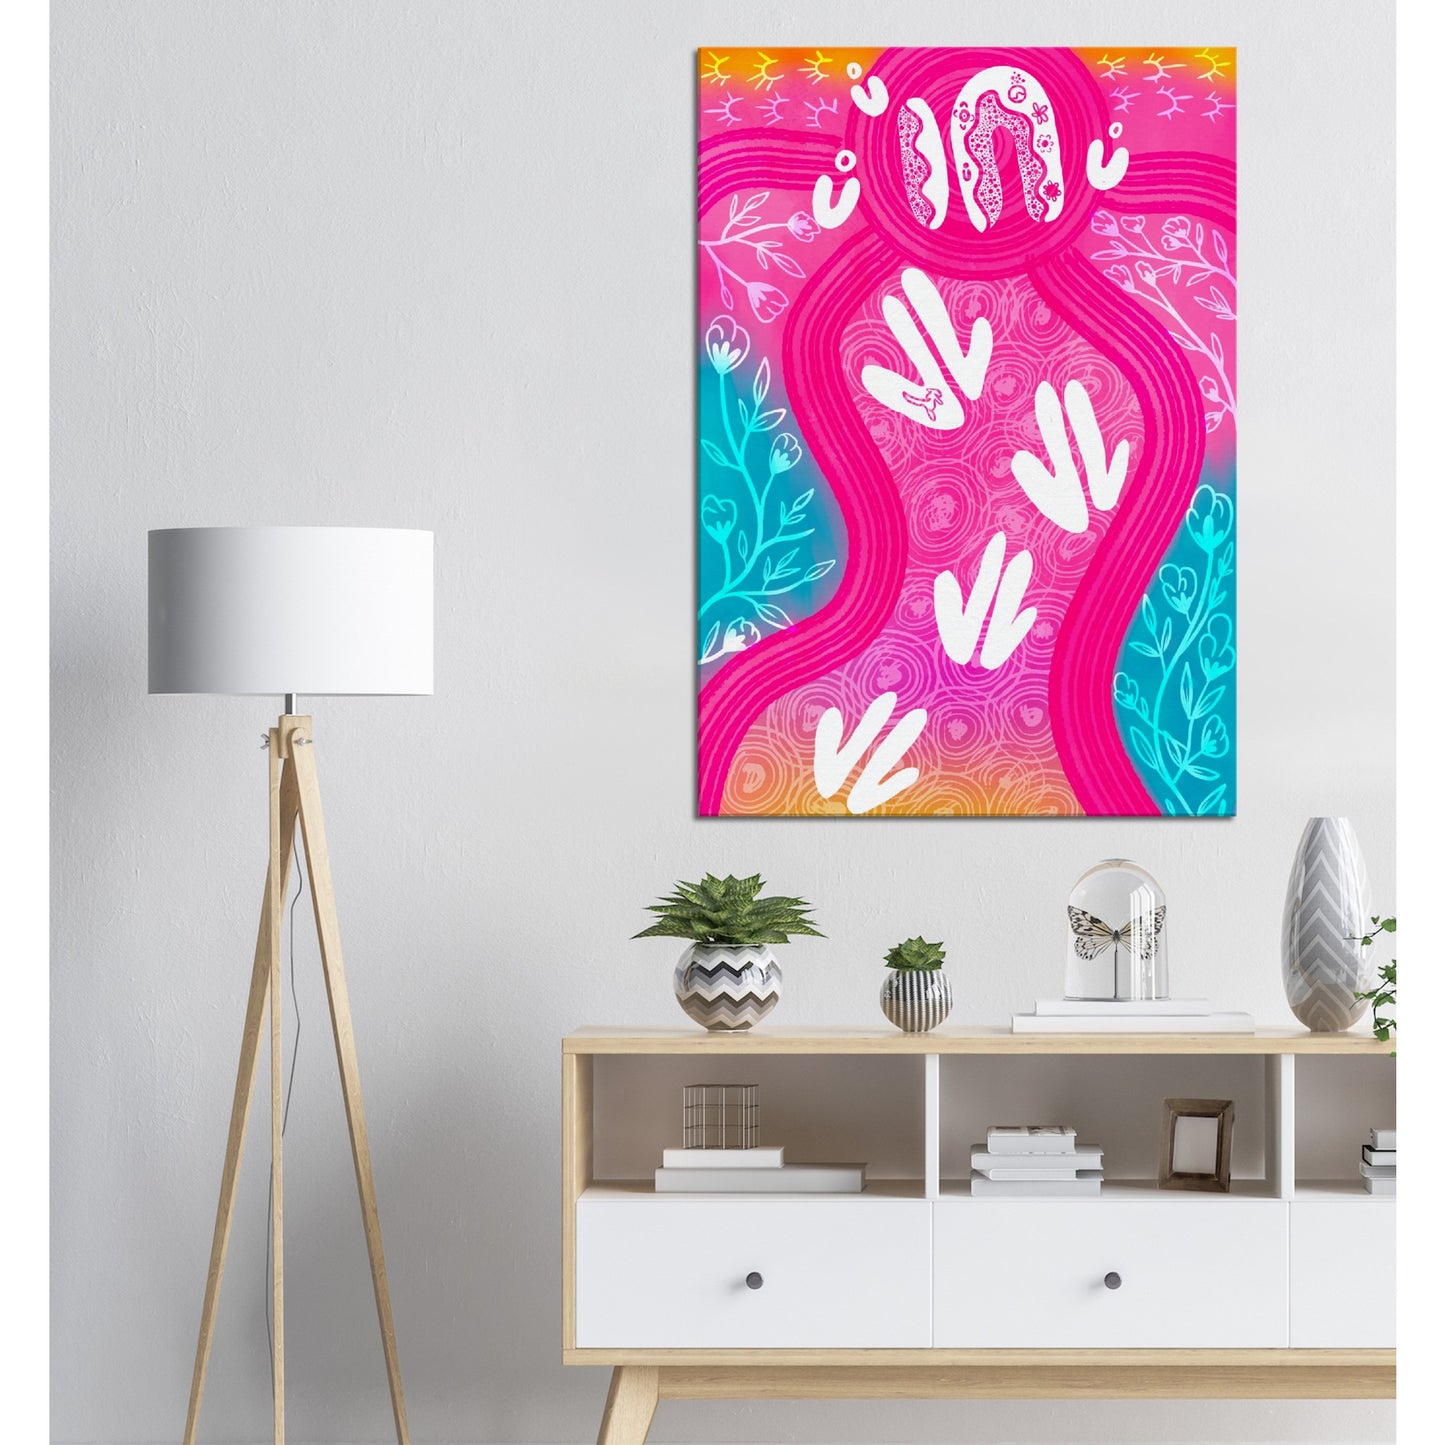 Aboriginal Art | Provider and Protector | Print to Canvas | Limited Release